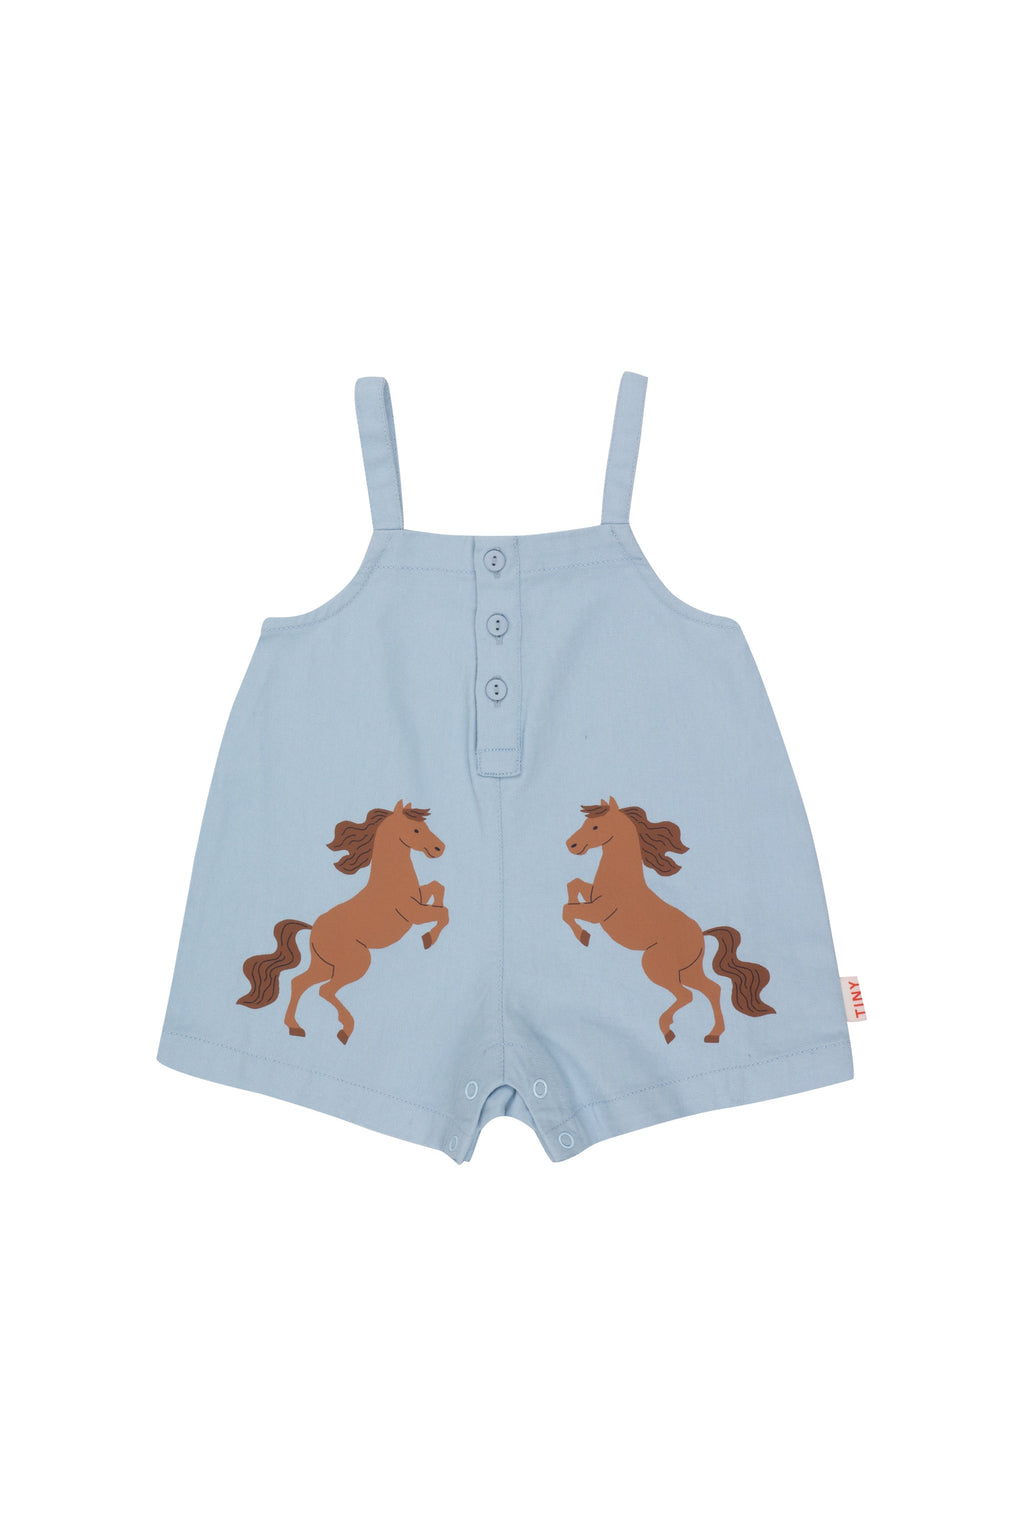 Tiny Cottons Horses Baby Dungaree - Blue-Grey